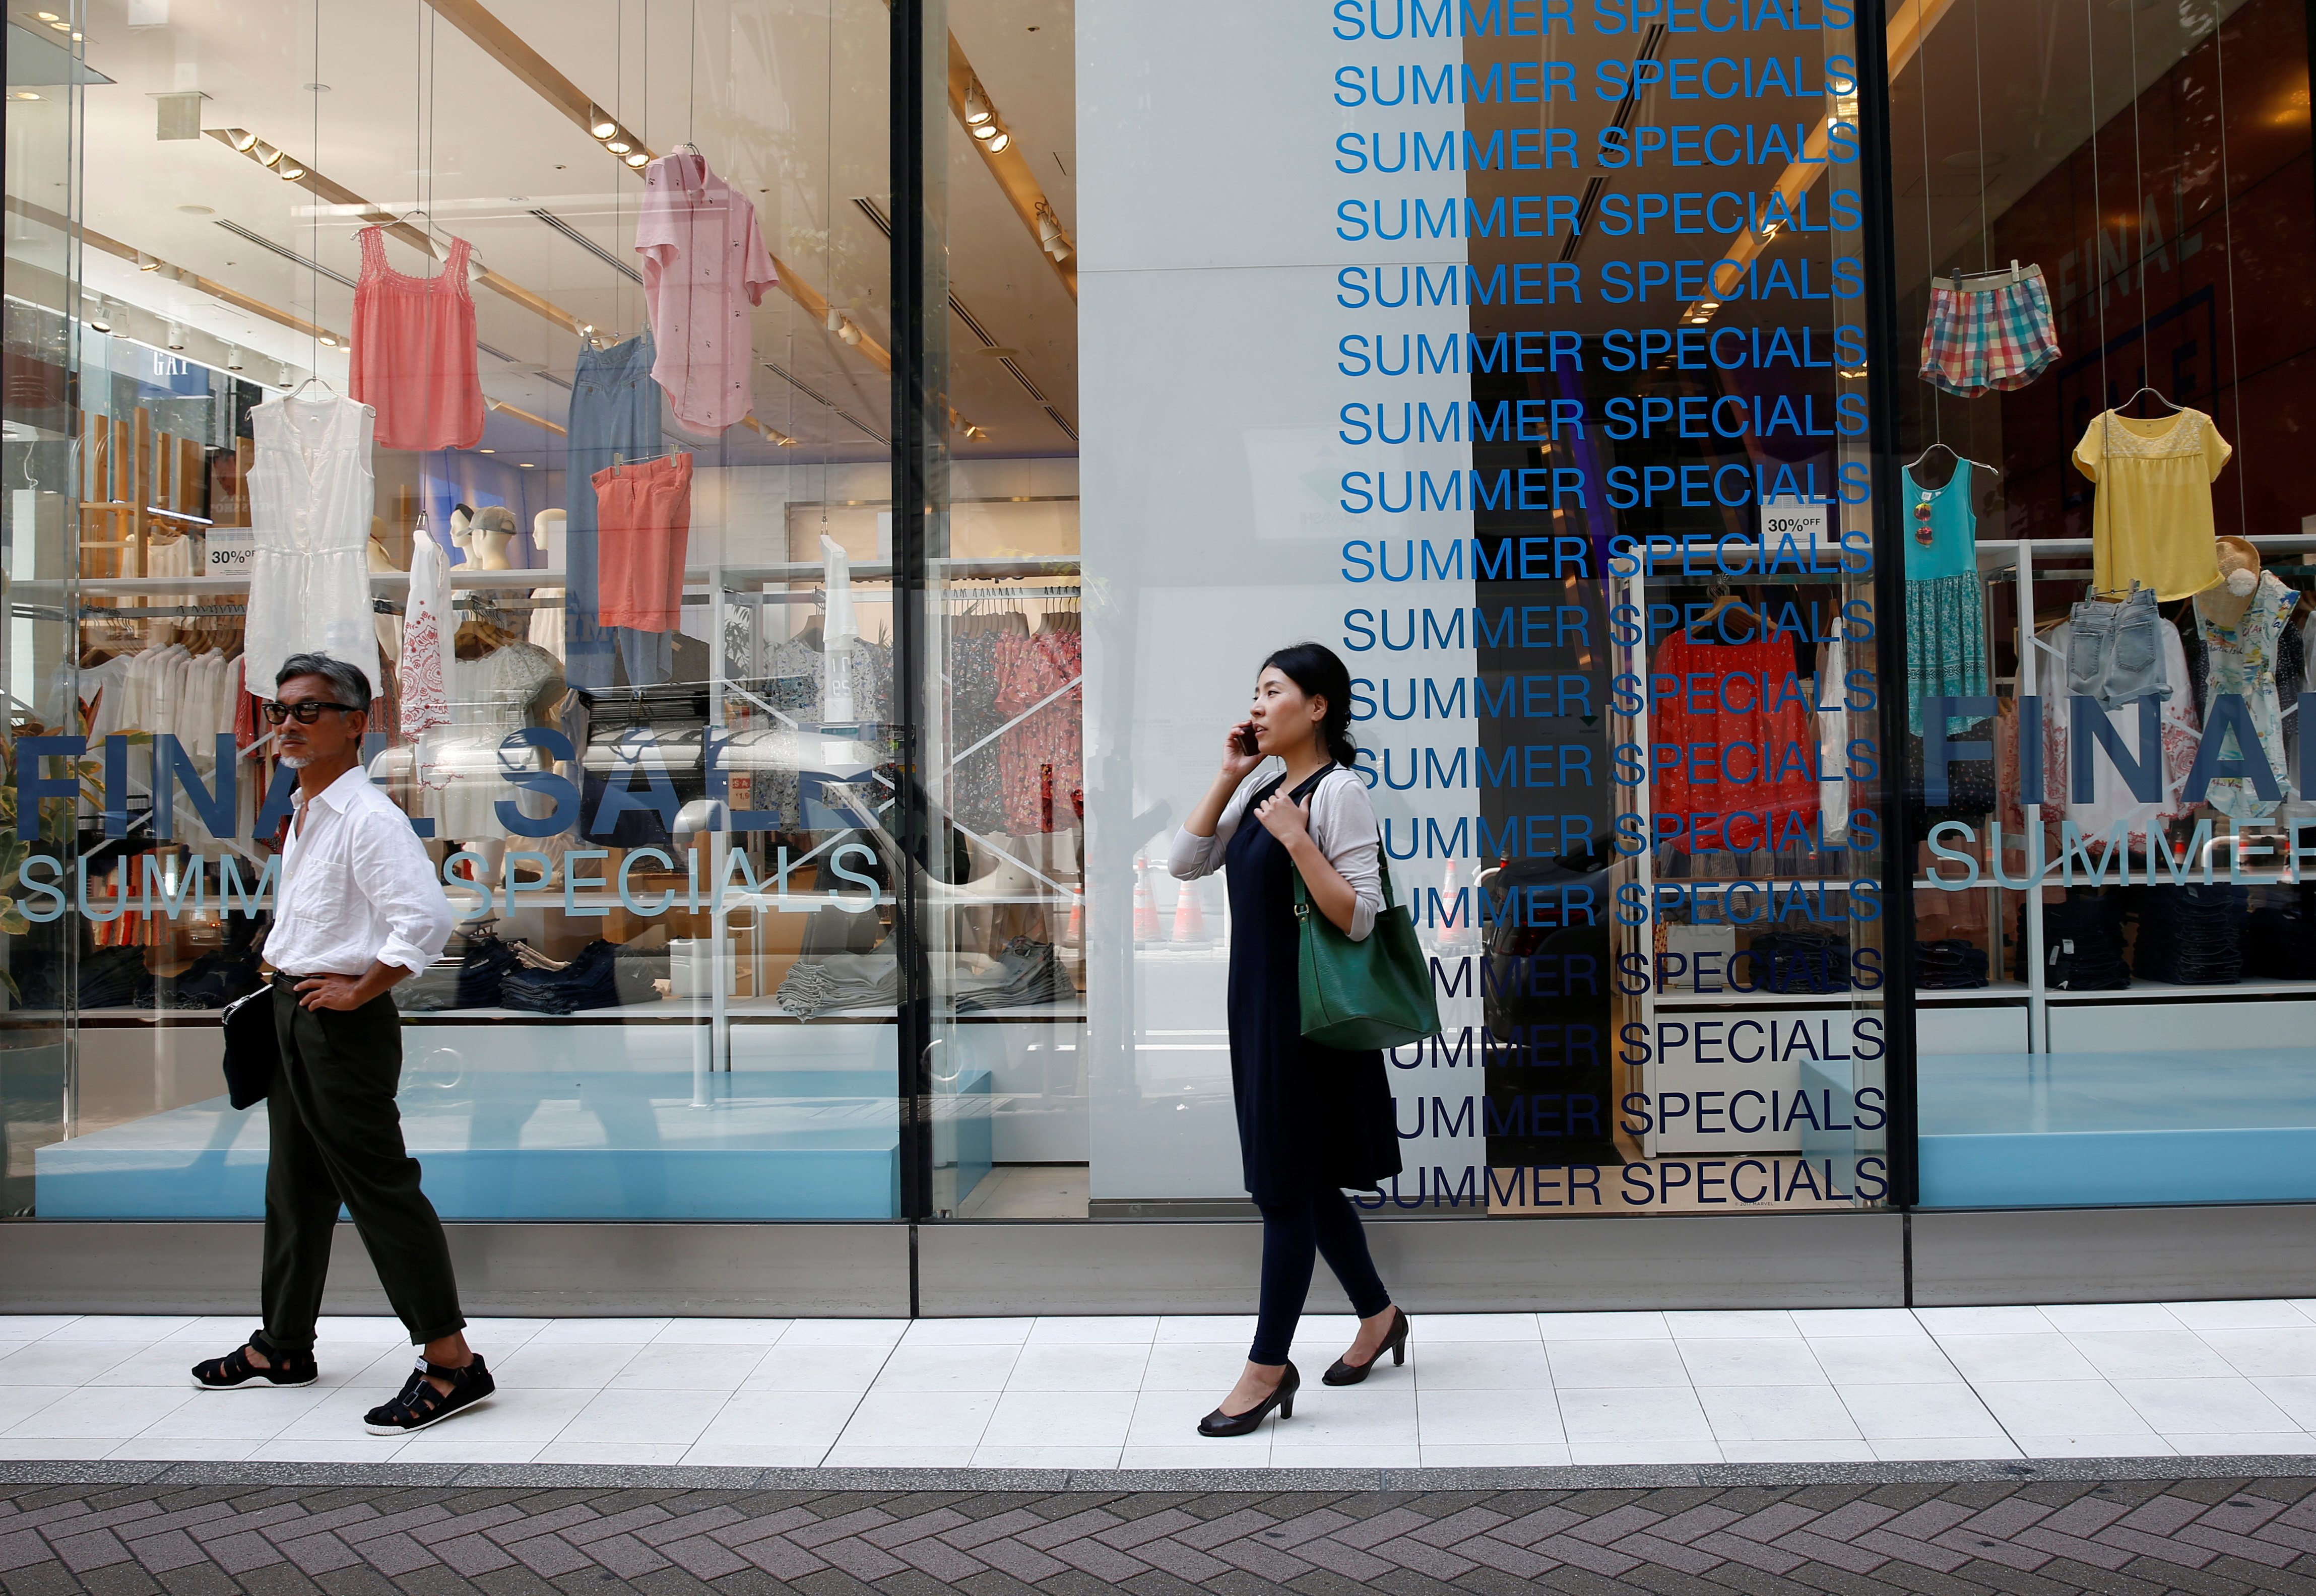 Pedestrians stand in front of sale signs on a shopfront at a shopping district in Tokyo